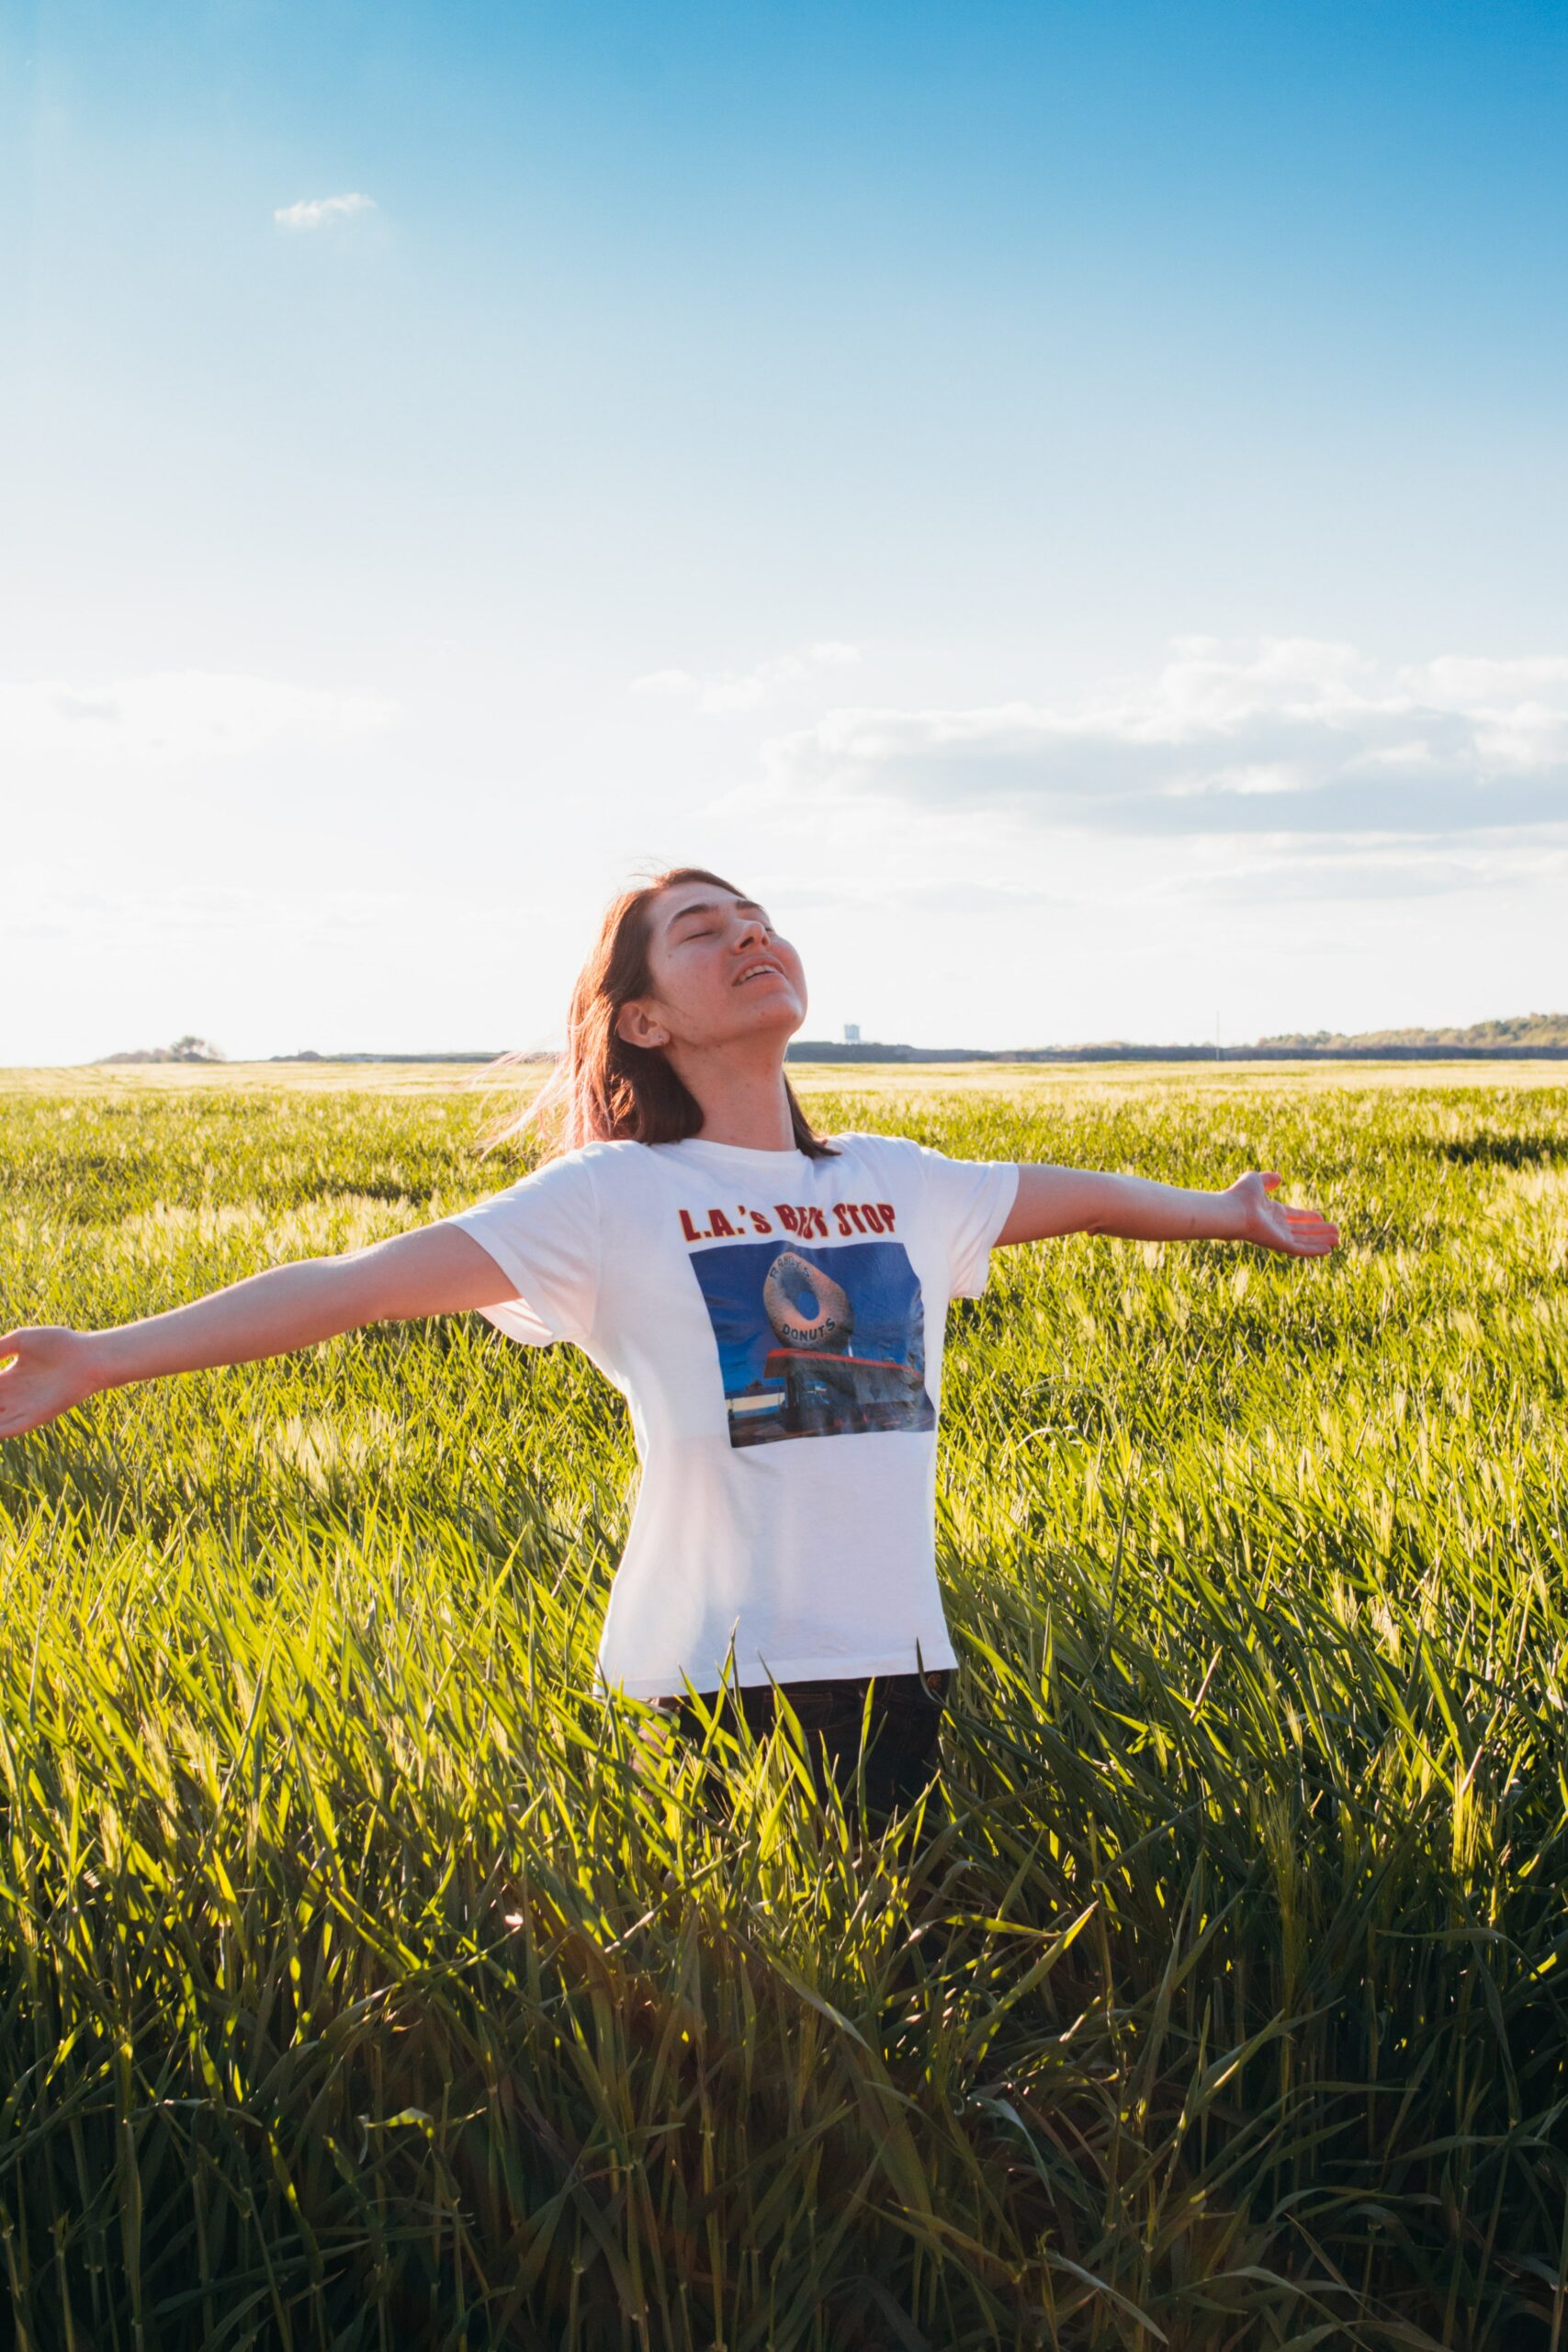 Smiling brunette in a white shirt standing in a grassy field with arms outstretched